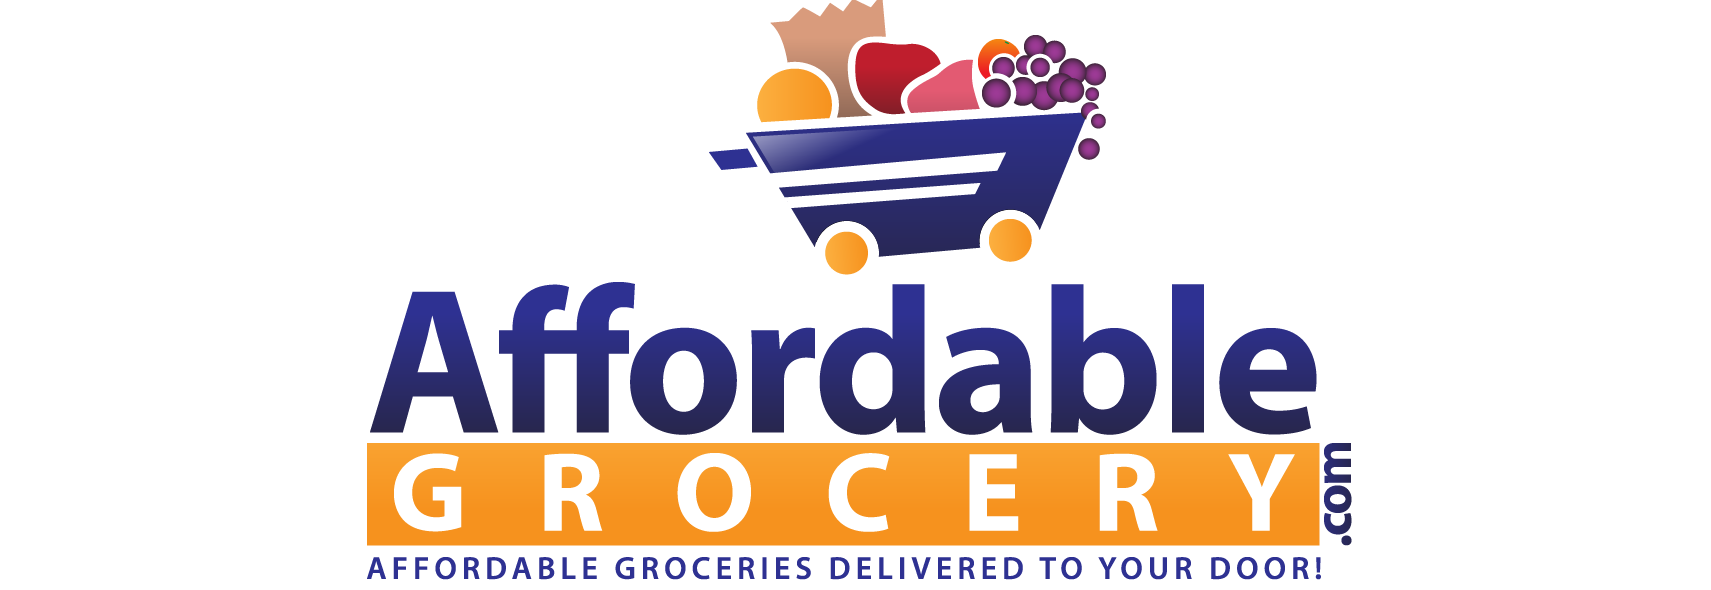 Affordable Grocery